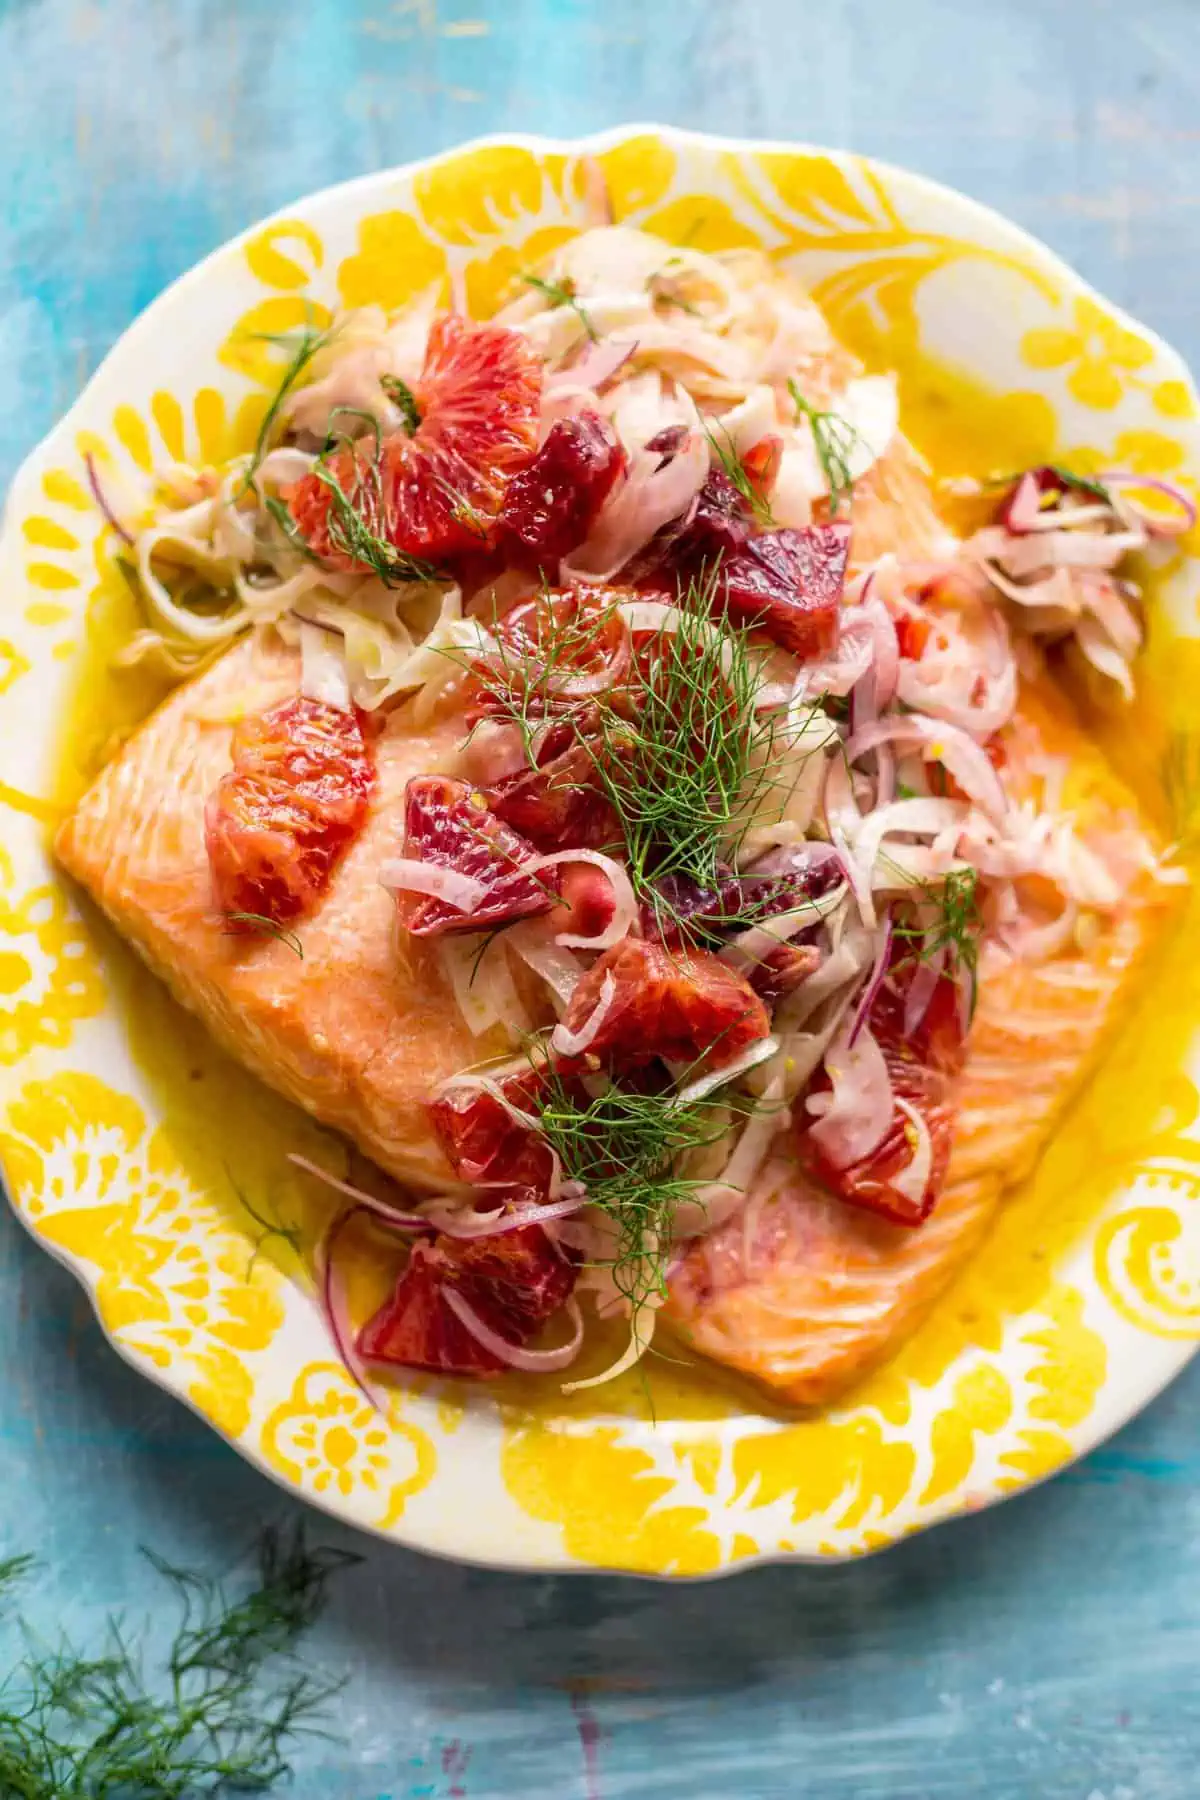 Top view of a yellow plate with a salmon fillet covered in fresh herbs and sliced citrus.